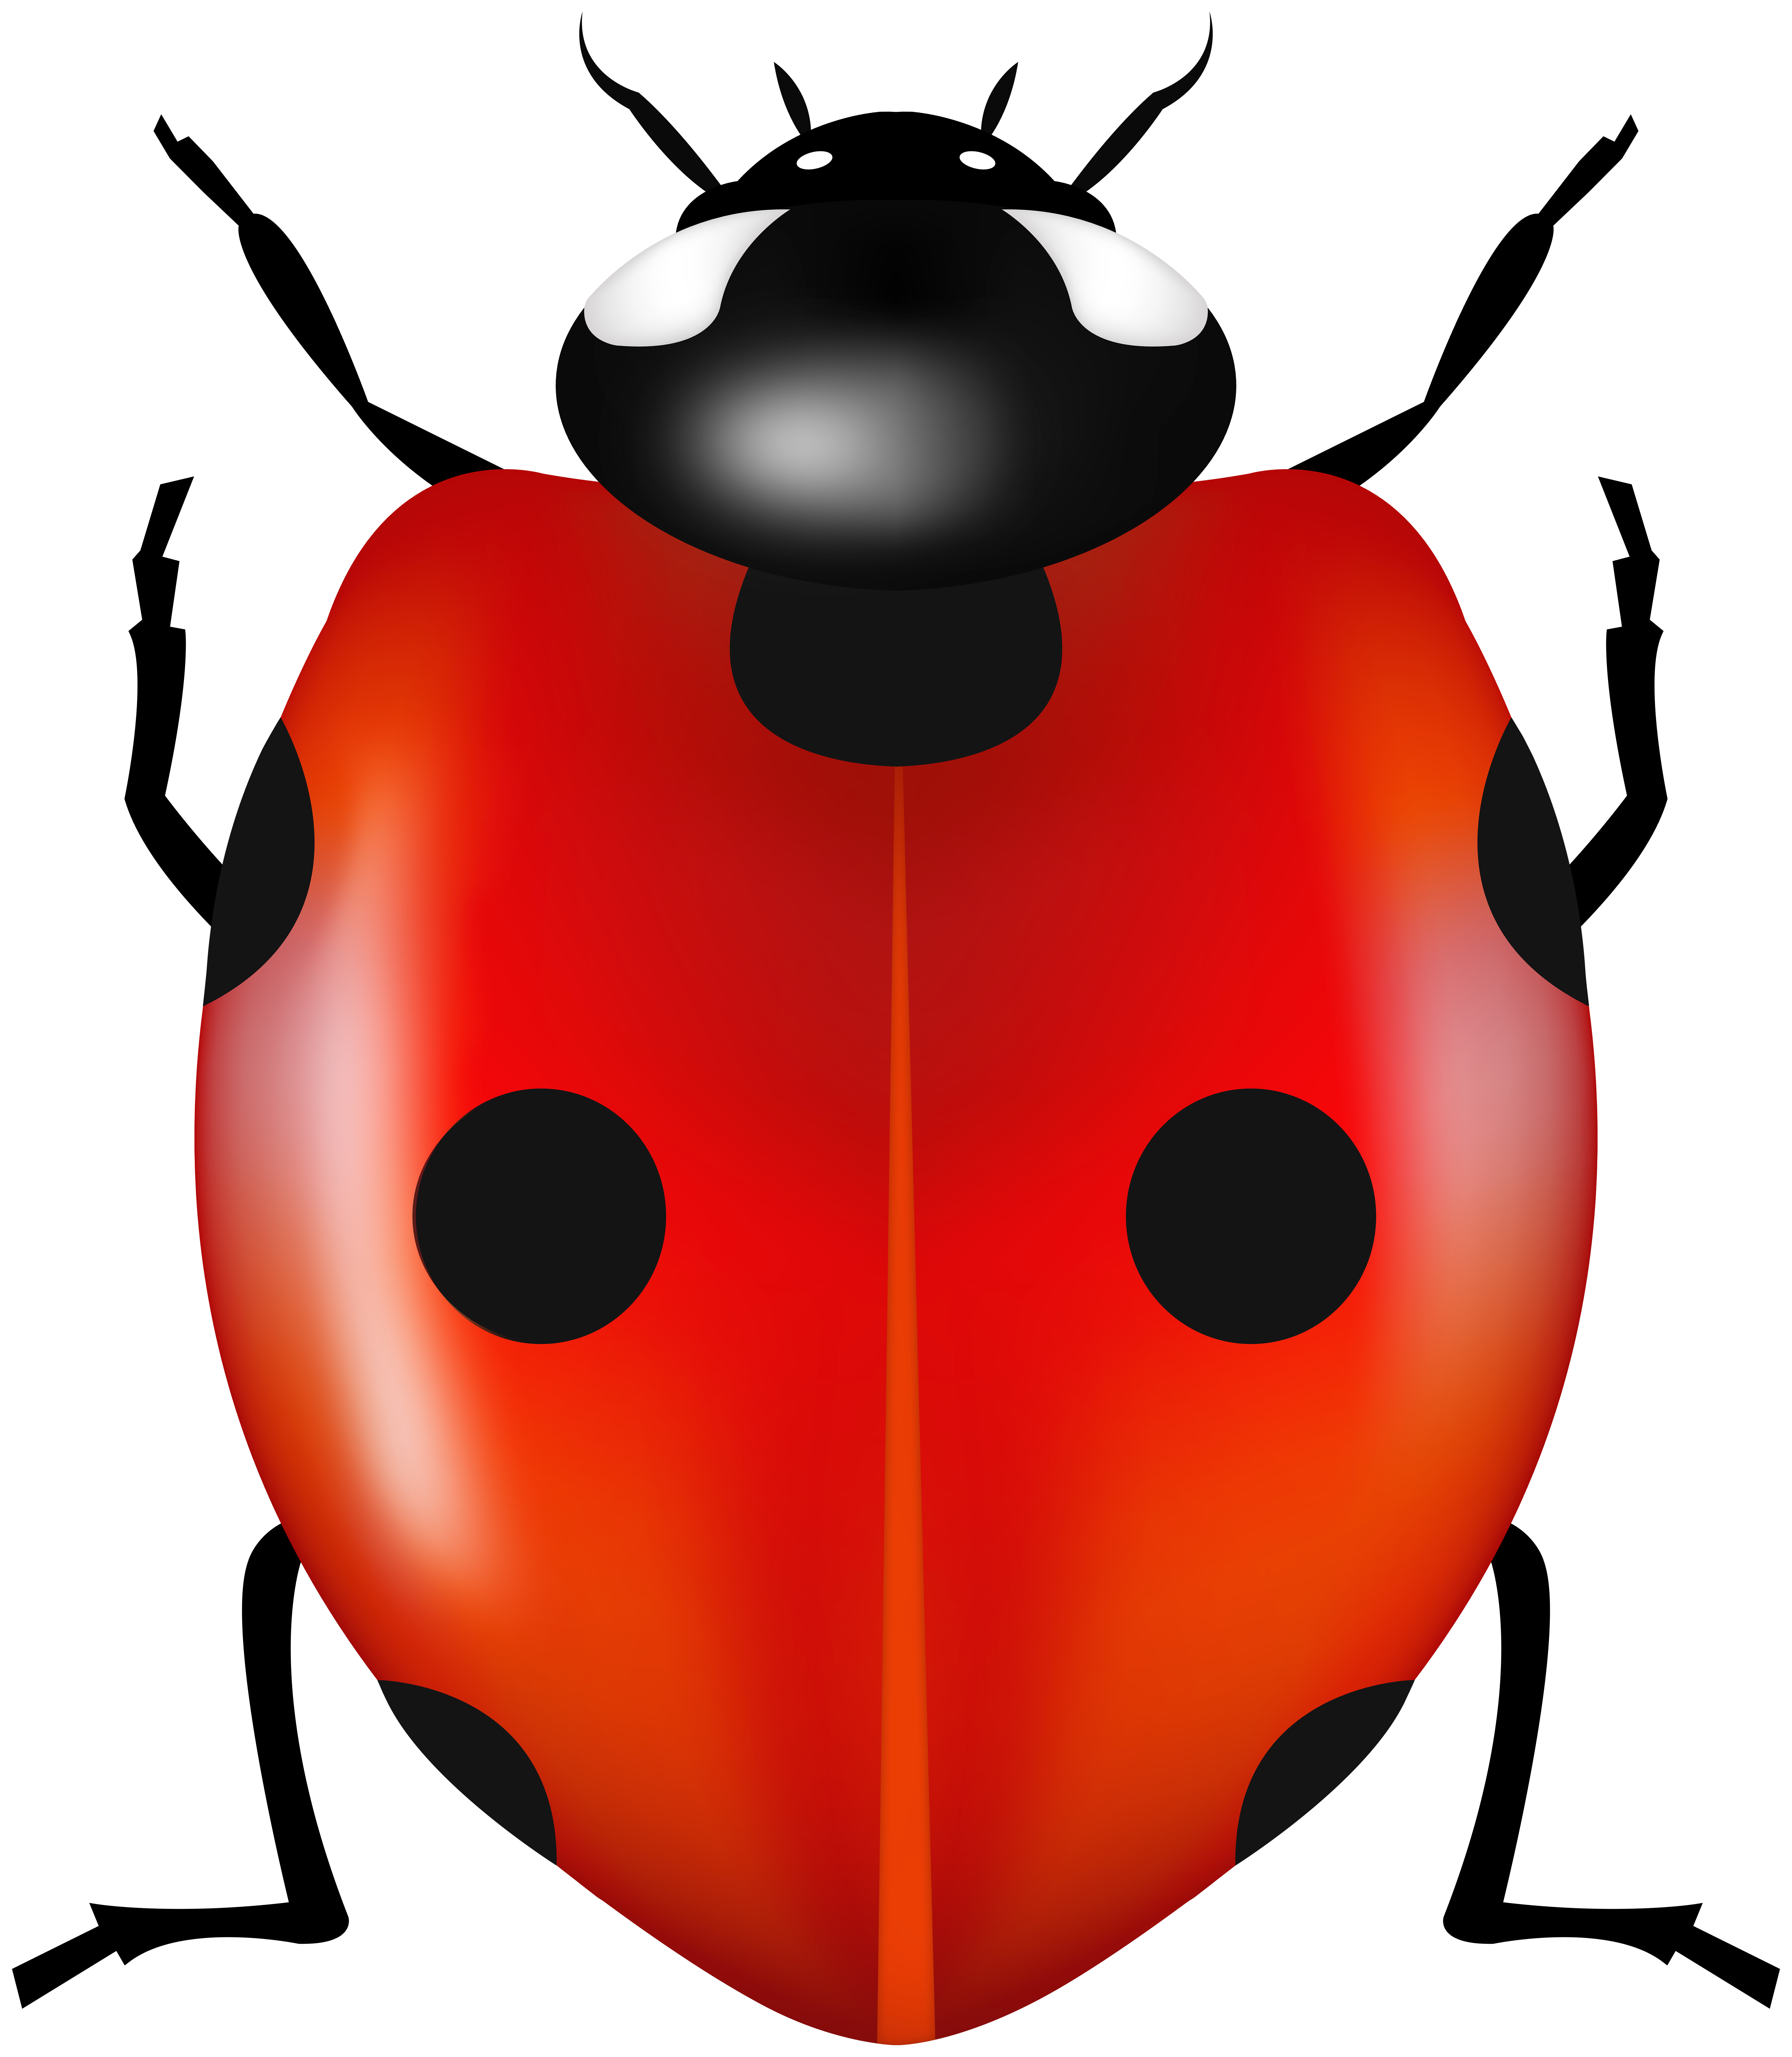 Ladybug PNGs for Free Download